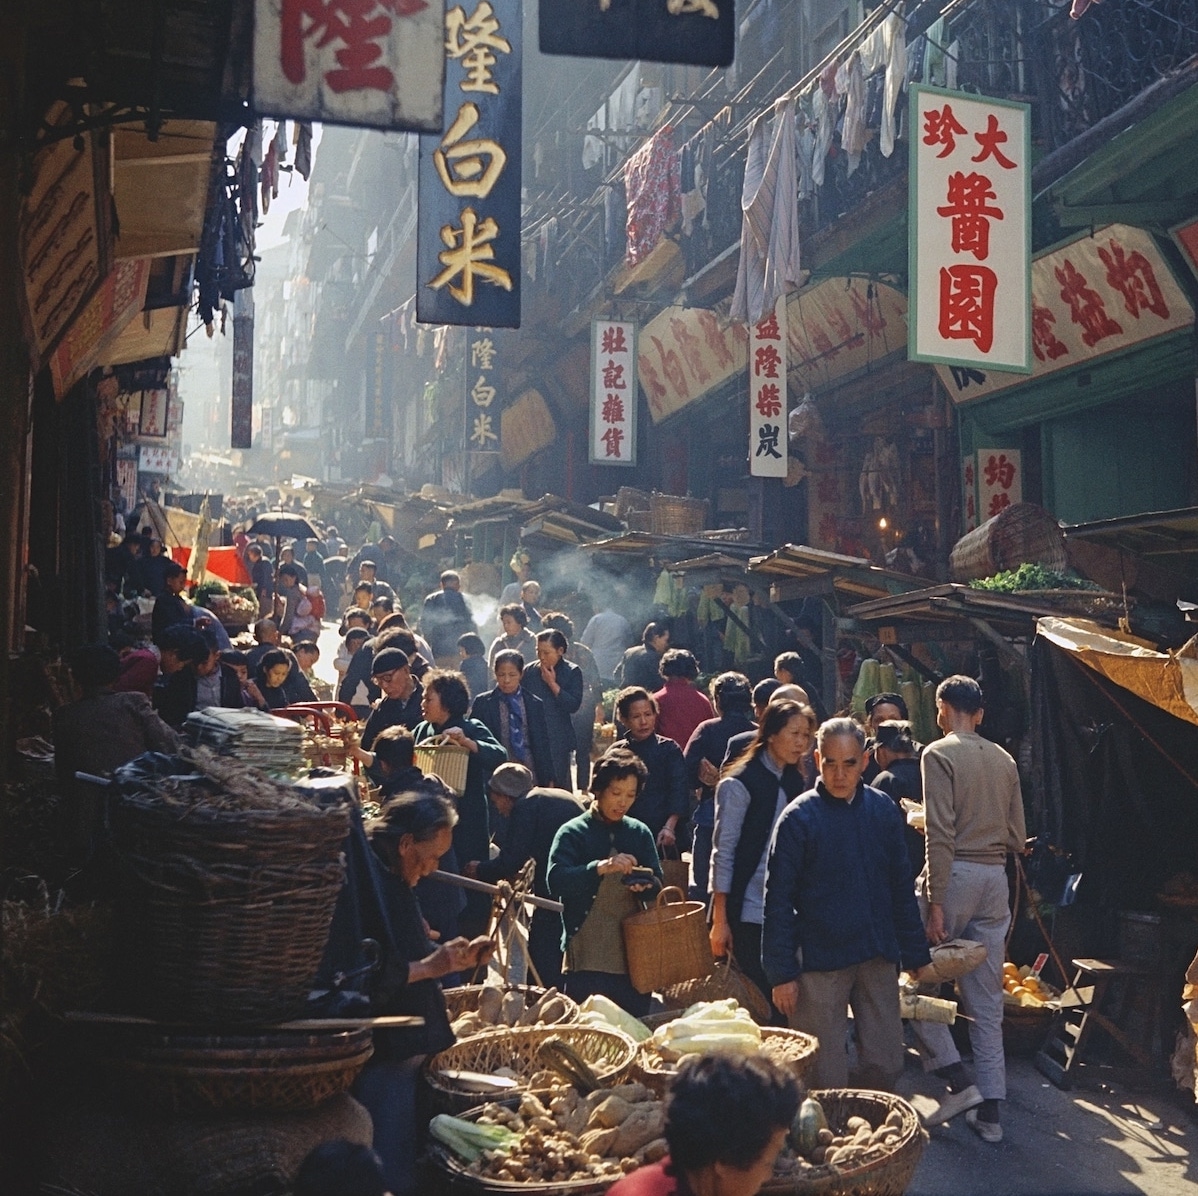 Sublime Street Photographs of Hong Kong in the 1950s and 1960s - Flashbak